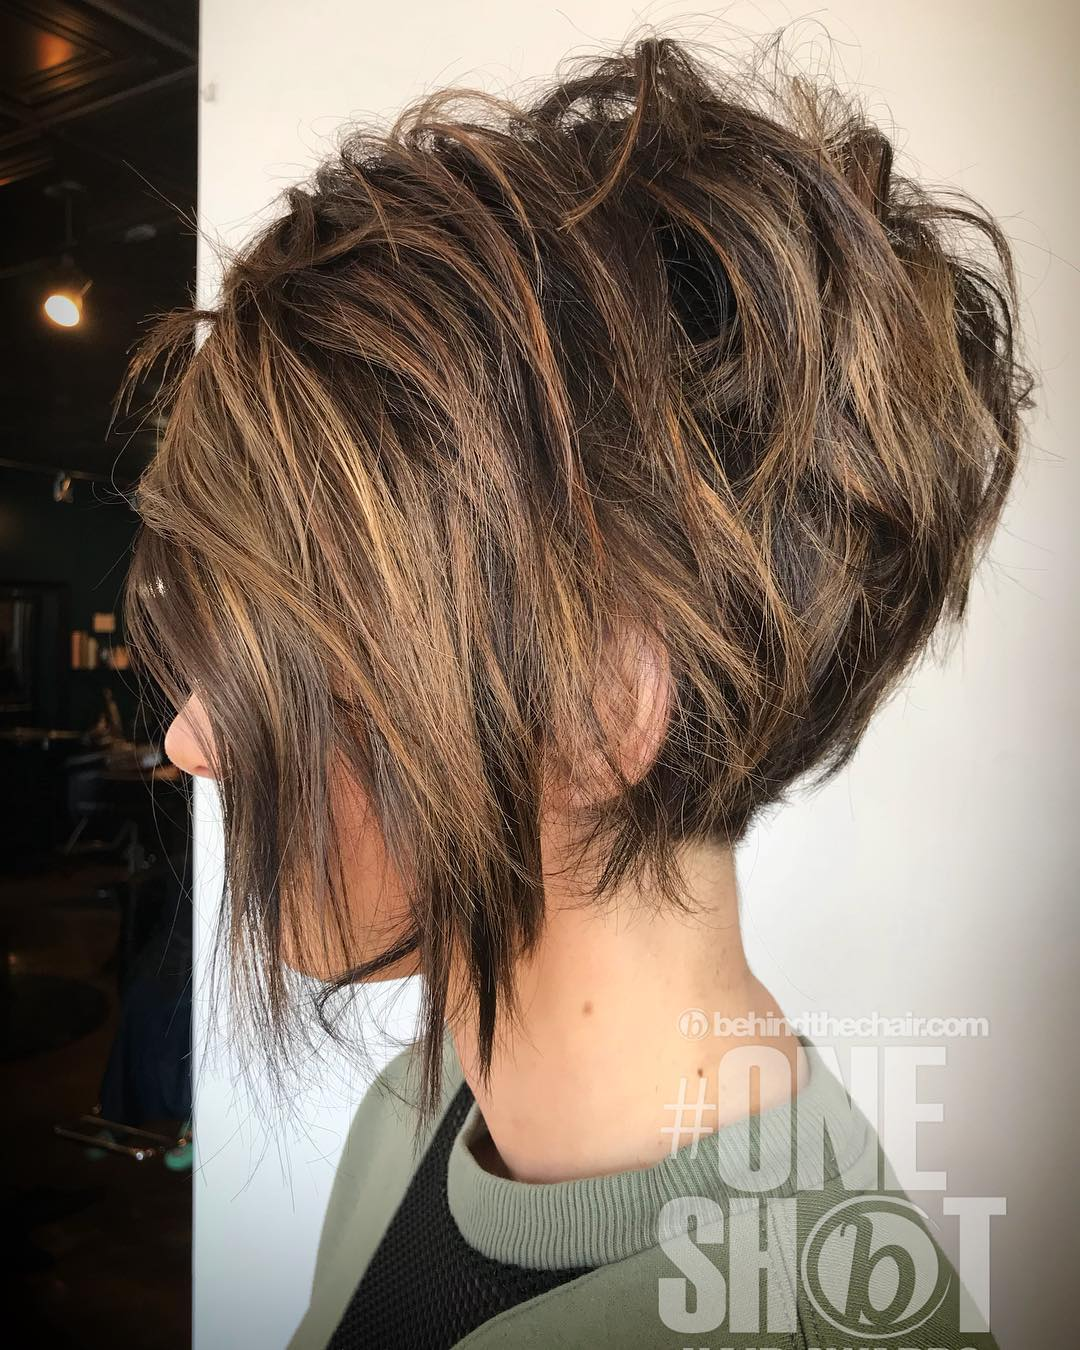 Messy Highlighted Pixie with Long Side Bangs